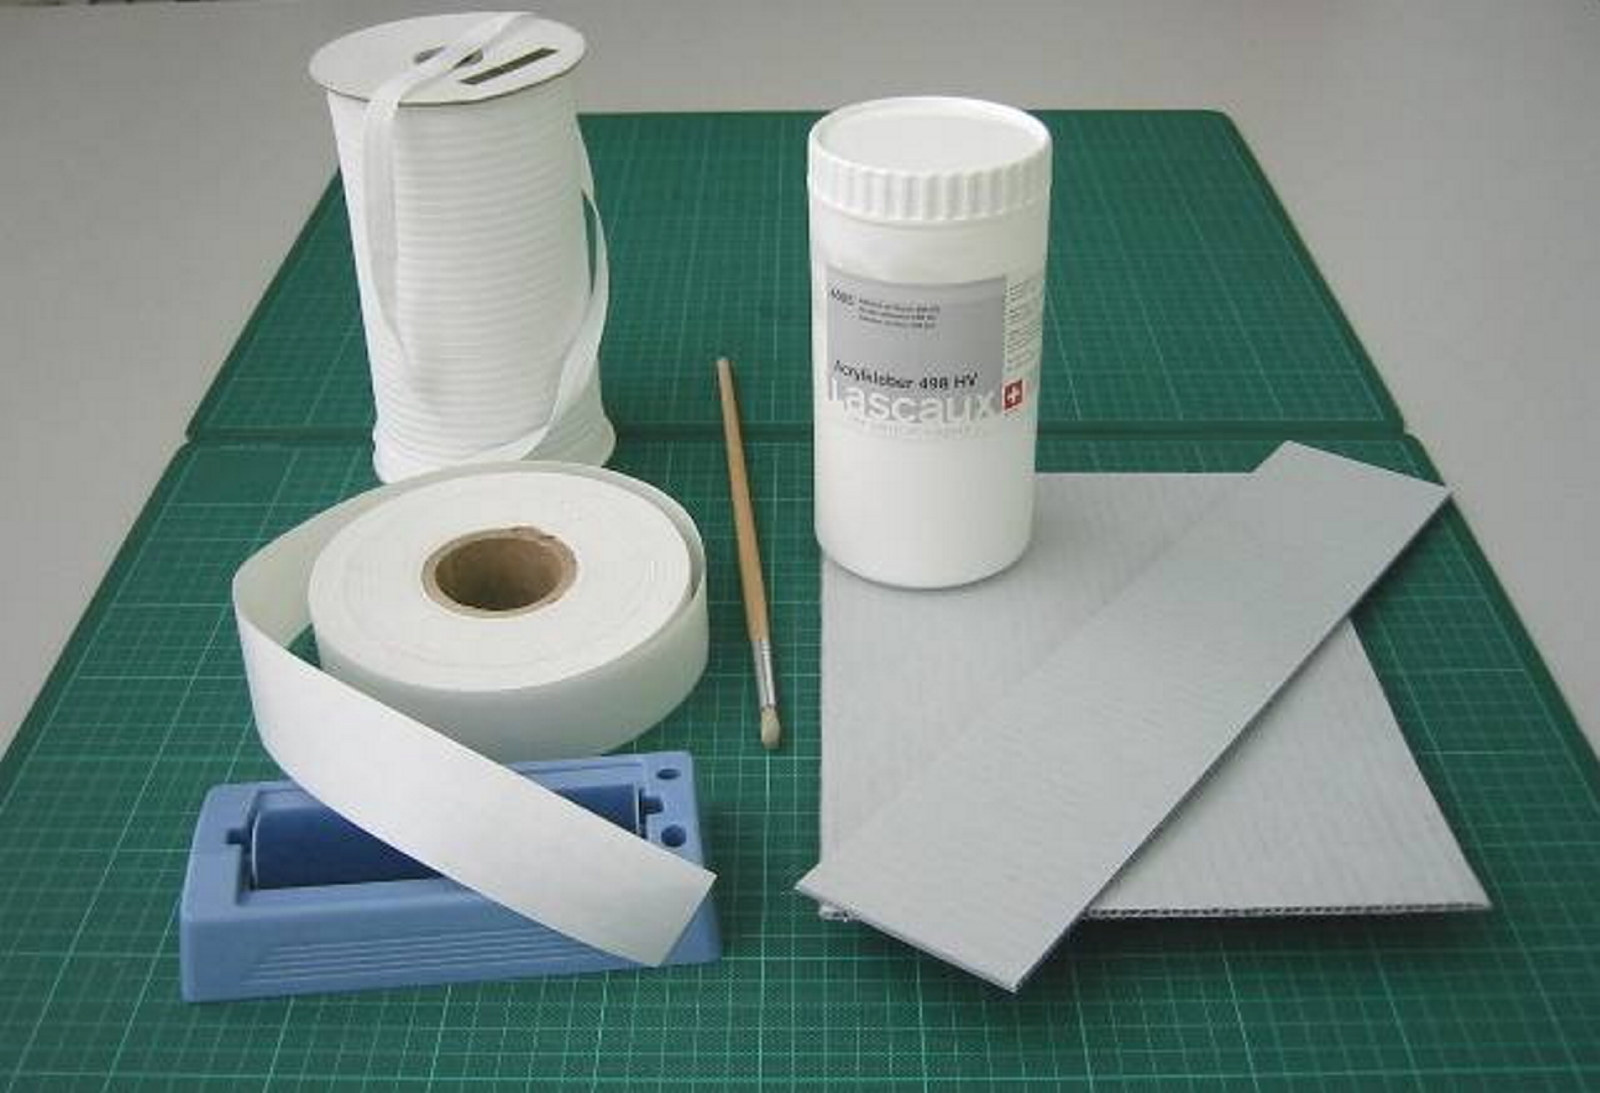 Fig. 3 - Materials clockwise from top left, cotton tape, Lascaux, corrugated board, gummed linen tape. Included are a roller damper for wetting the linen tape and a brush for applying the adhesive